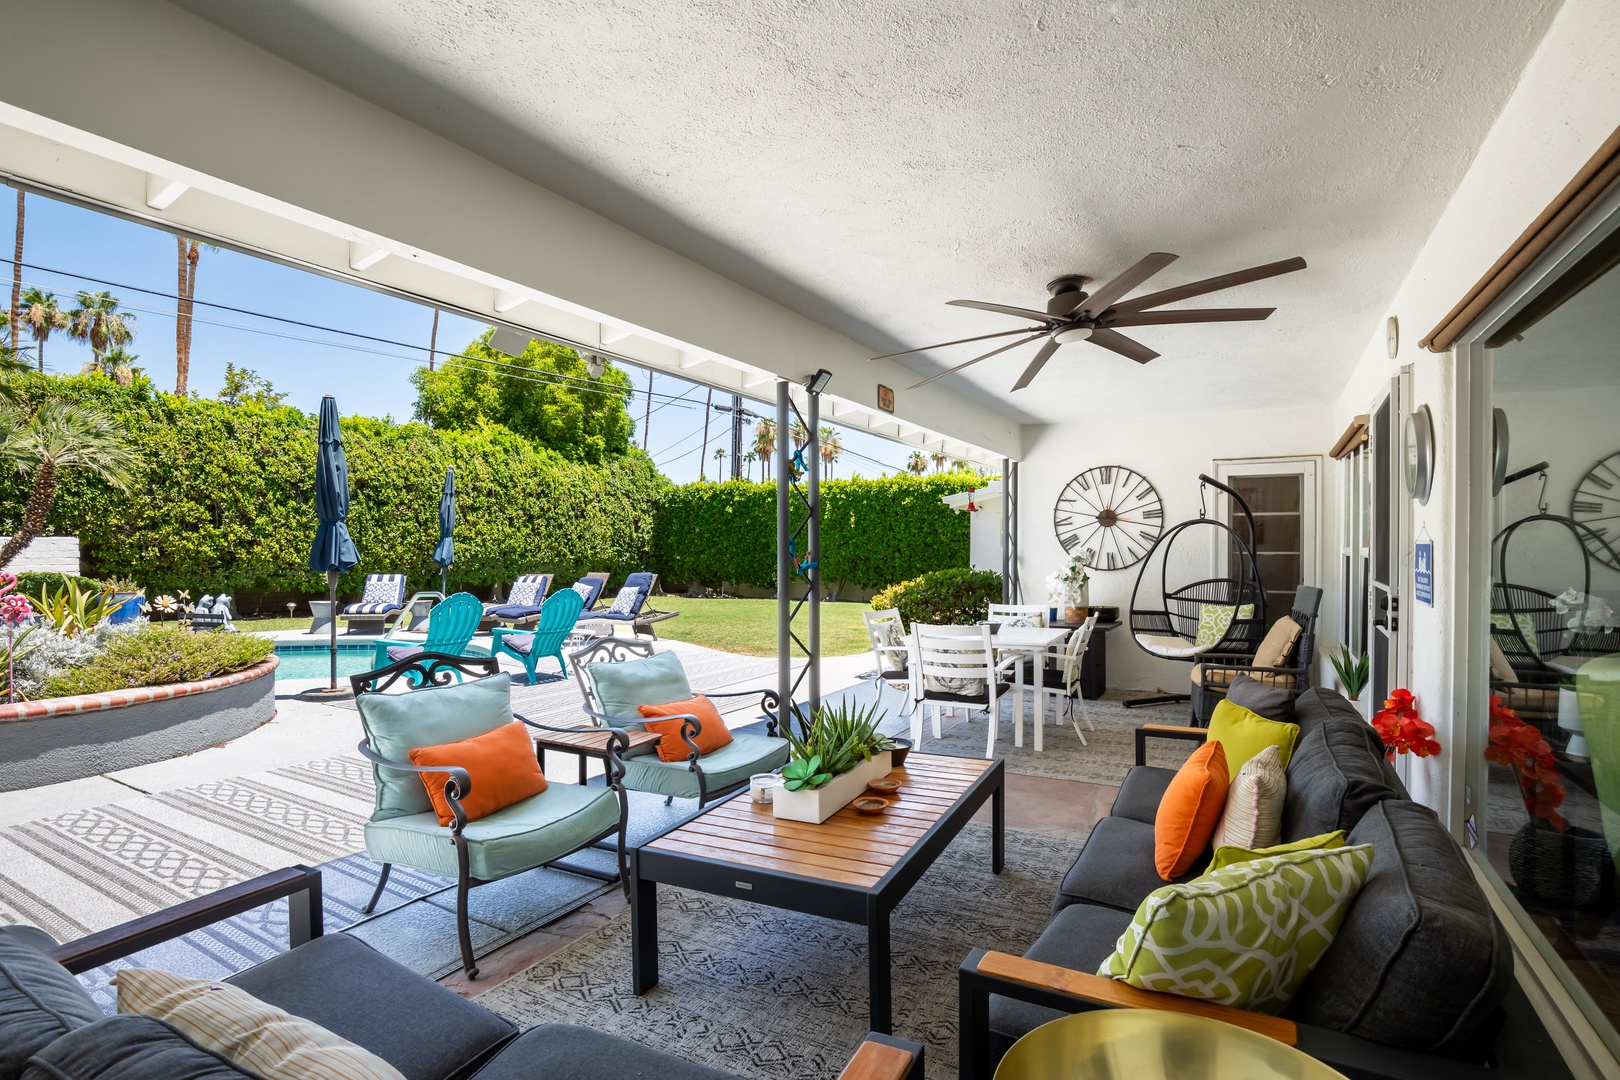 Comfortable outdoor seating by the pool for you and your guests